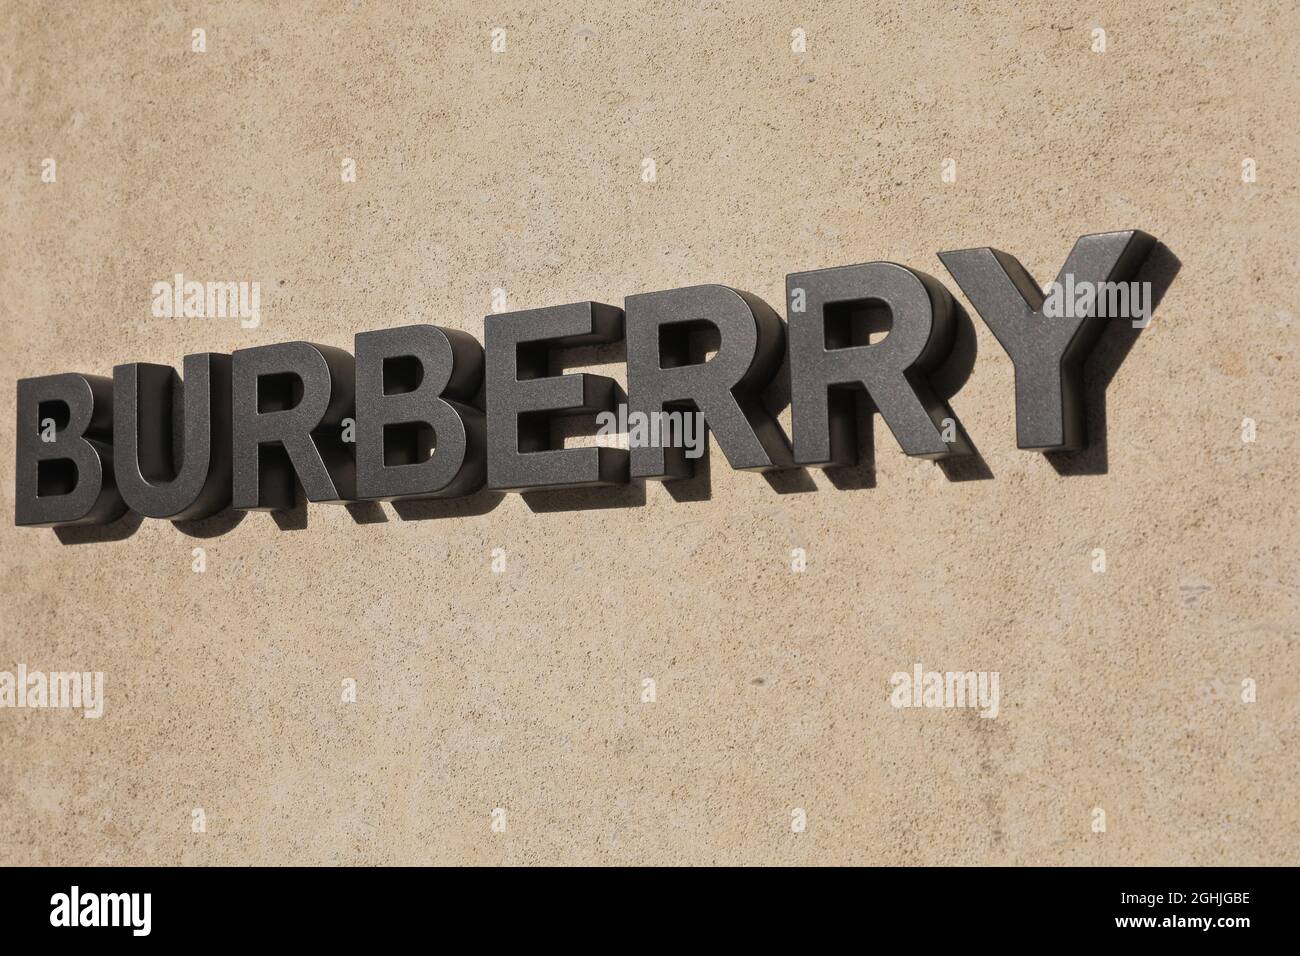 Burberry name brand logo and sign outside store in Bond Street, Mayfair, London, England, UK Stock Photo